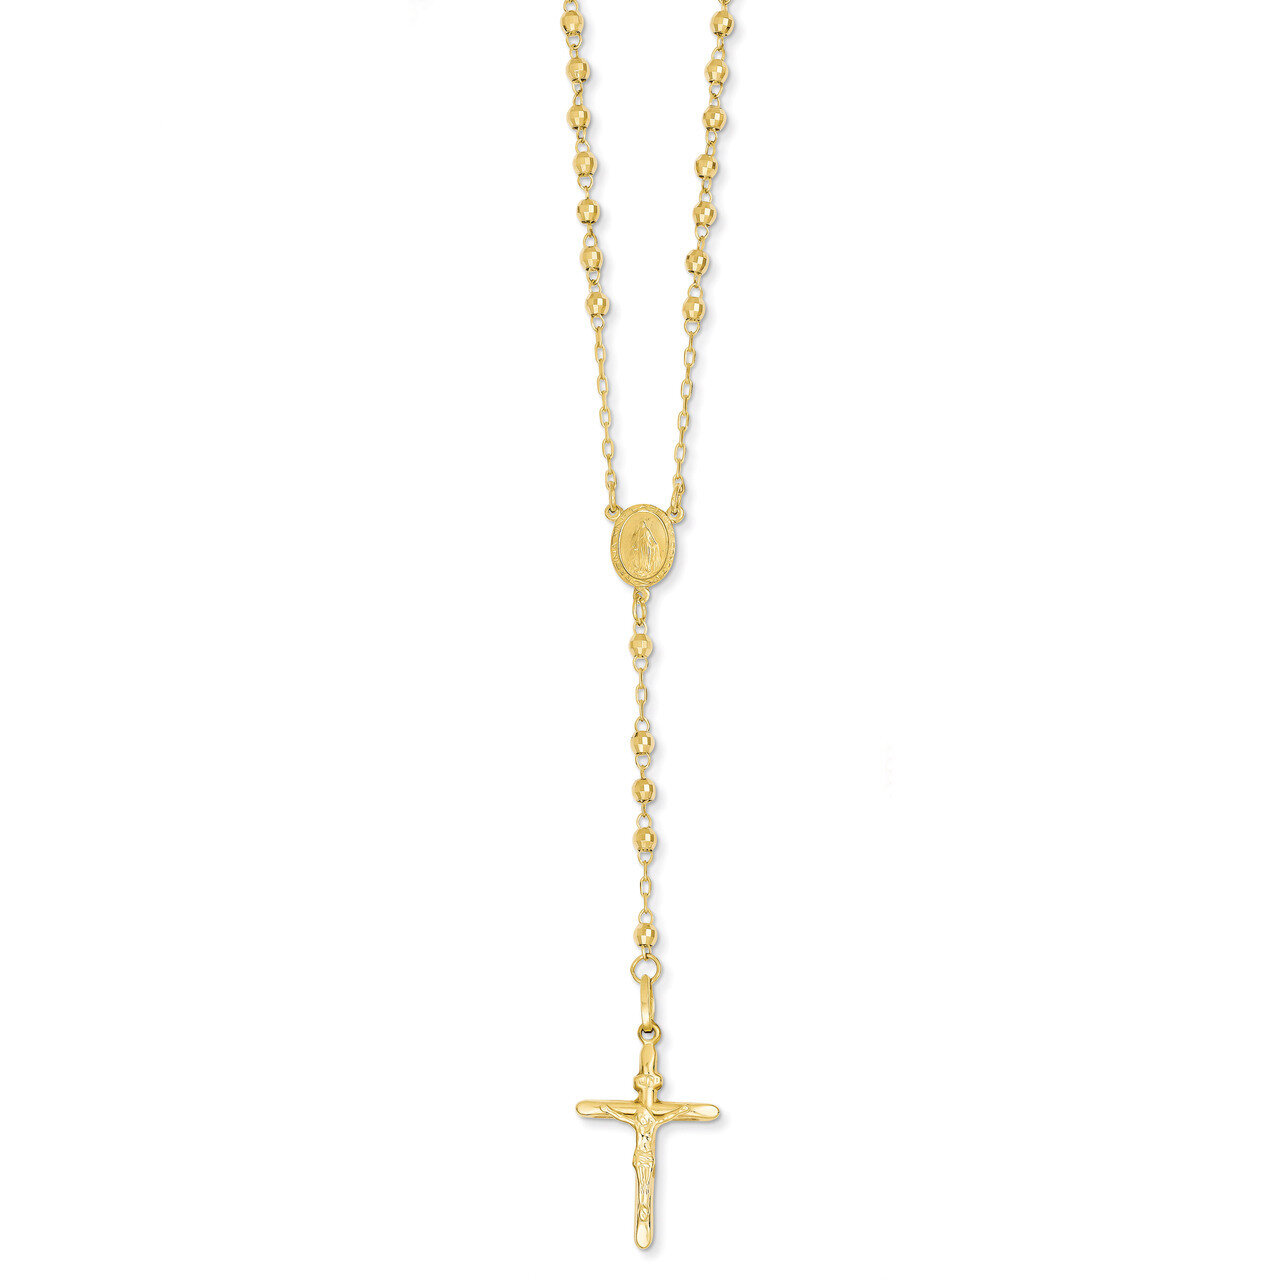 3mm Beaded Rosary Necklace 24 Inch 14k Gold Diamond-cut SF2065-24